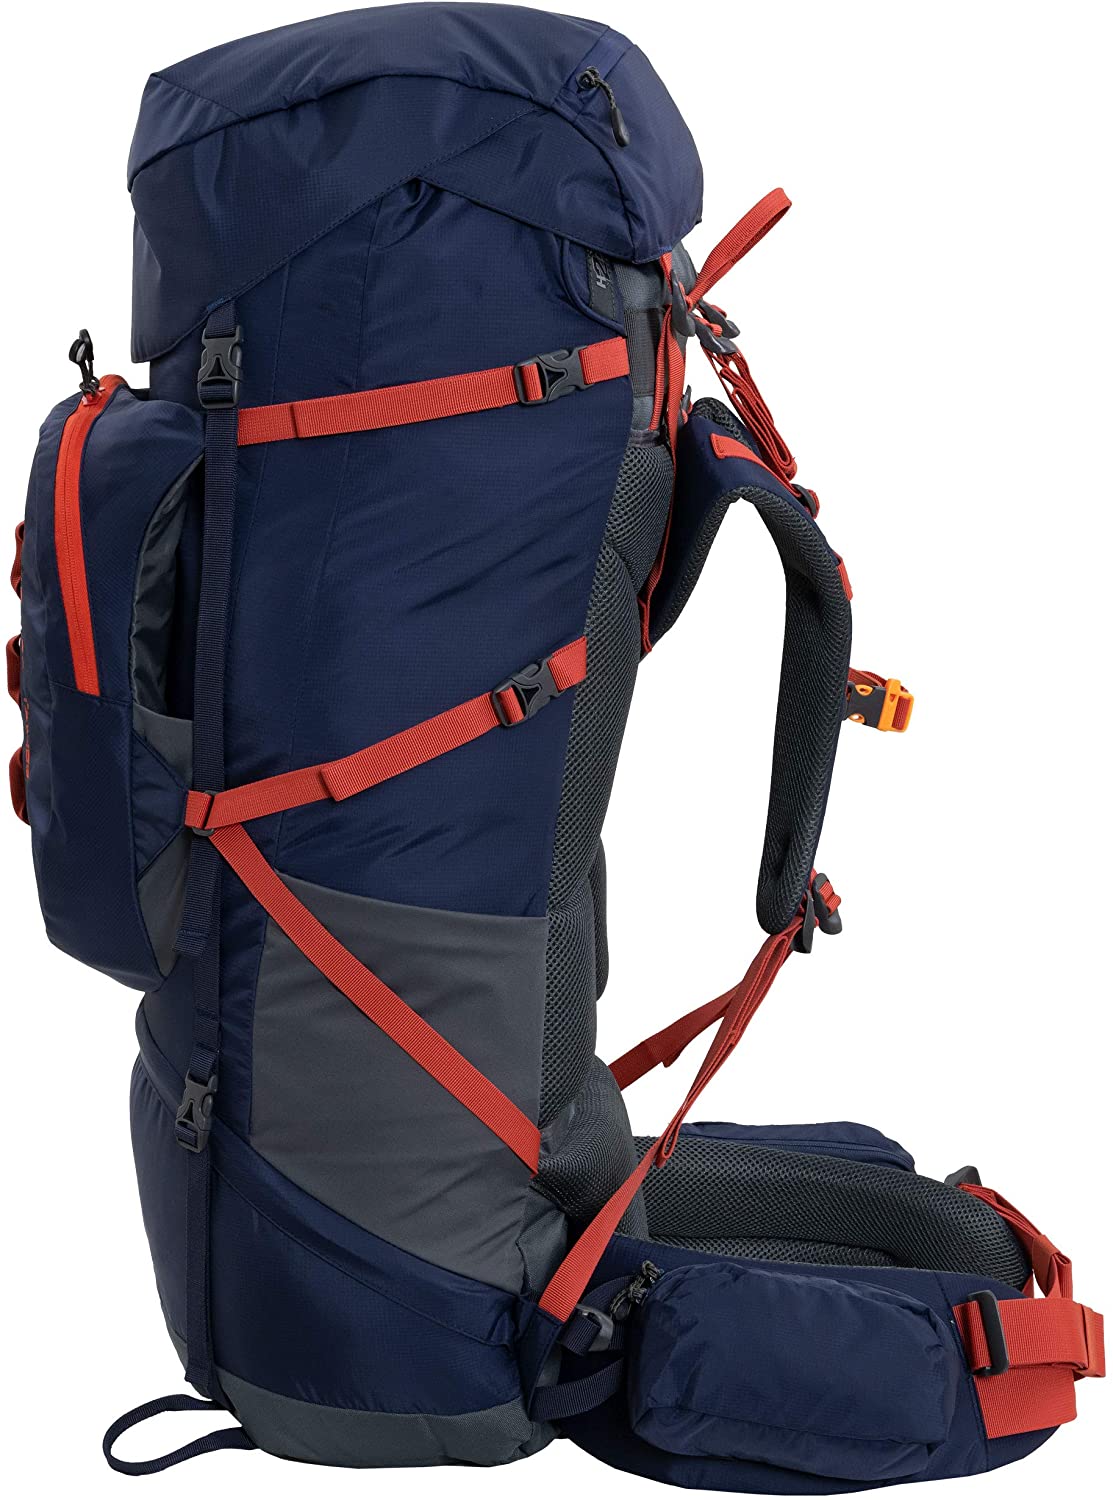 ALPS Mountaineering Red Tail Internal Frame Backpack 80L, Navy/Chili - AL2436868